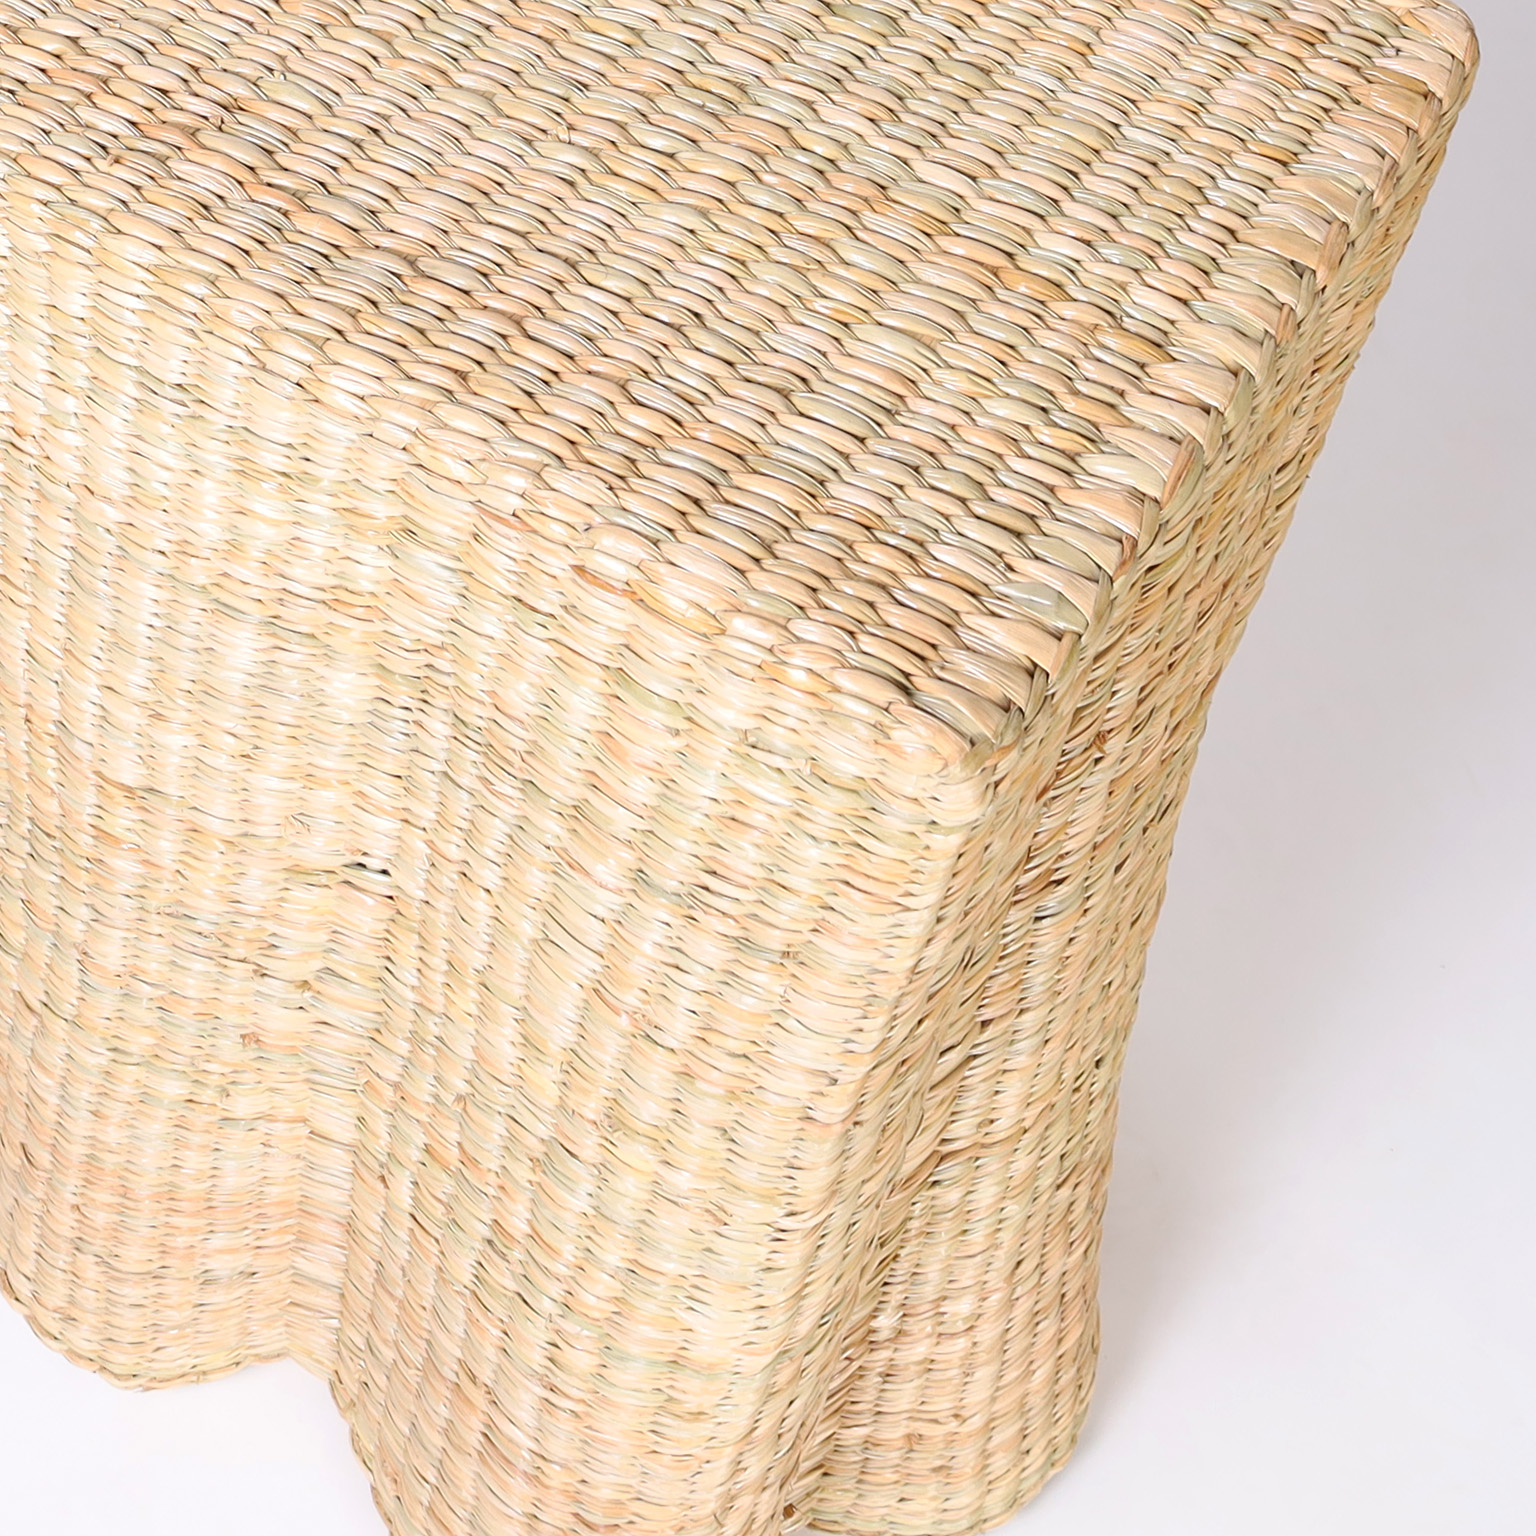 The Fernanda Pair of Wicker Drapery Ghost Consoles from The FS Flores Collection